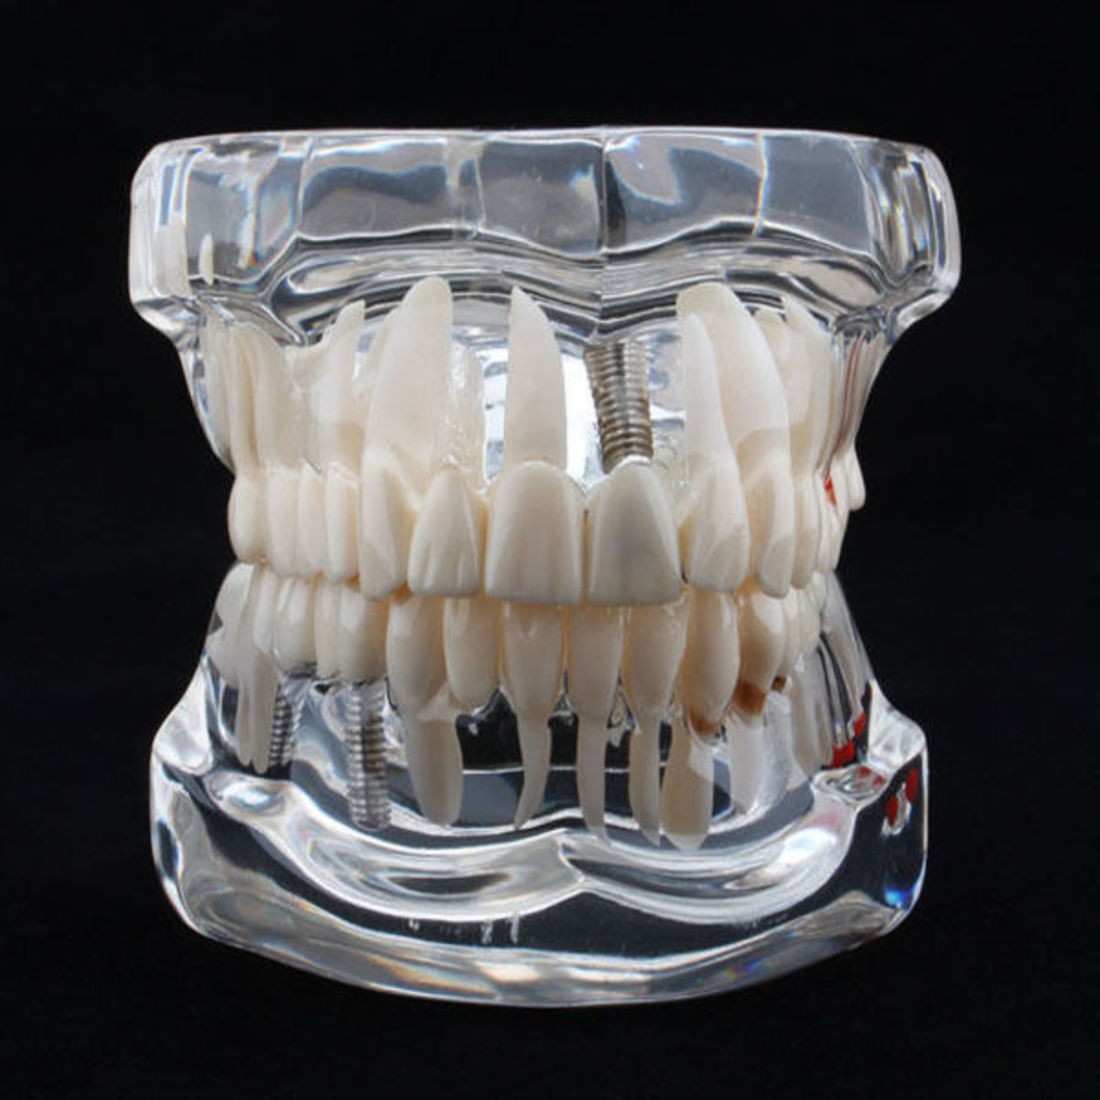 Education tooth model